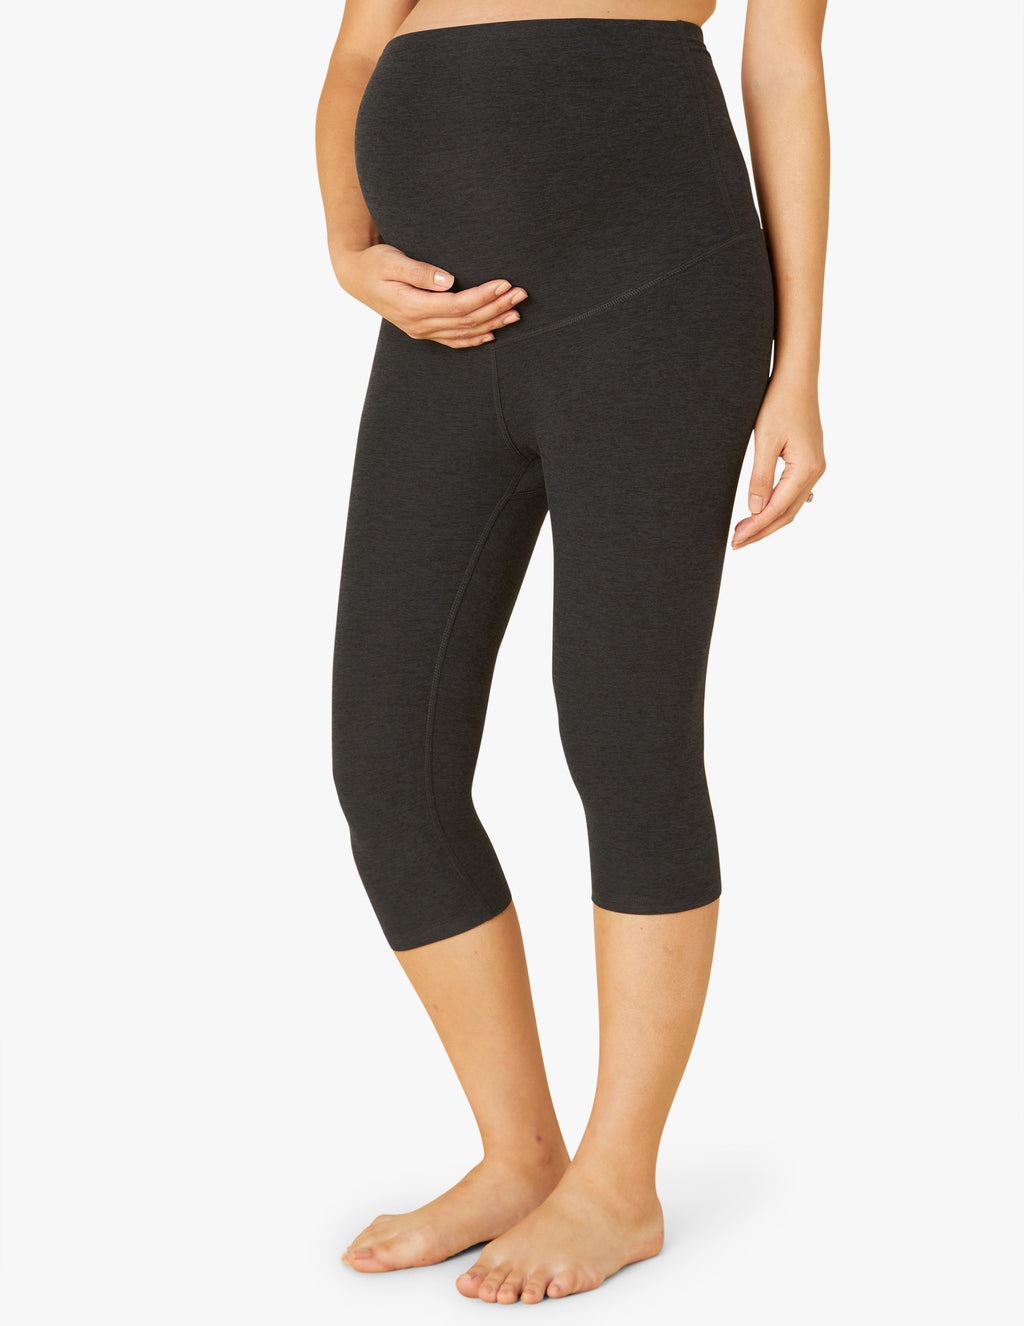 Spacedye Glow and Grow Maternity Pedal Pusher Legging Featured Image